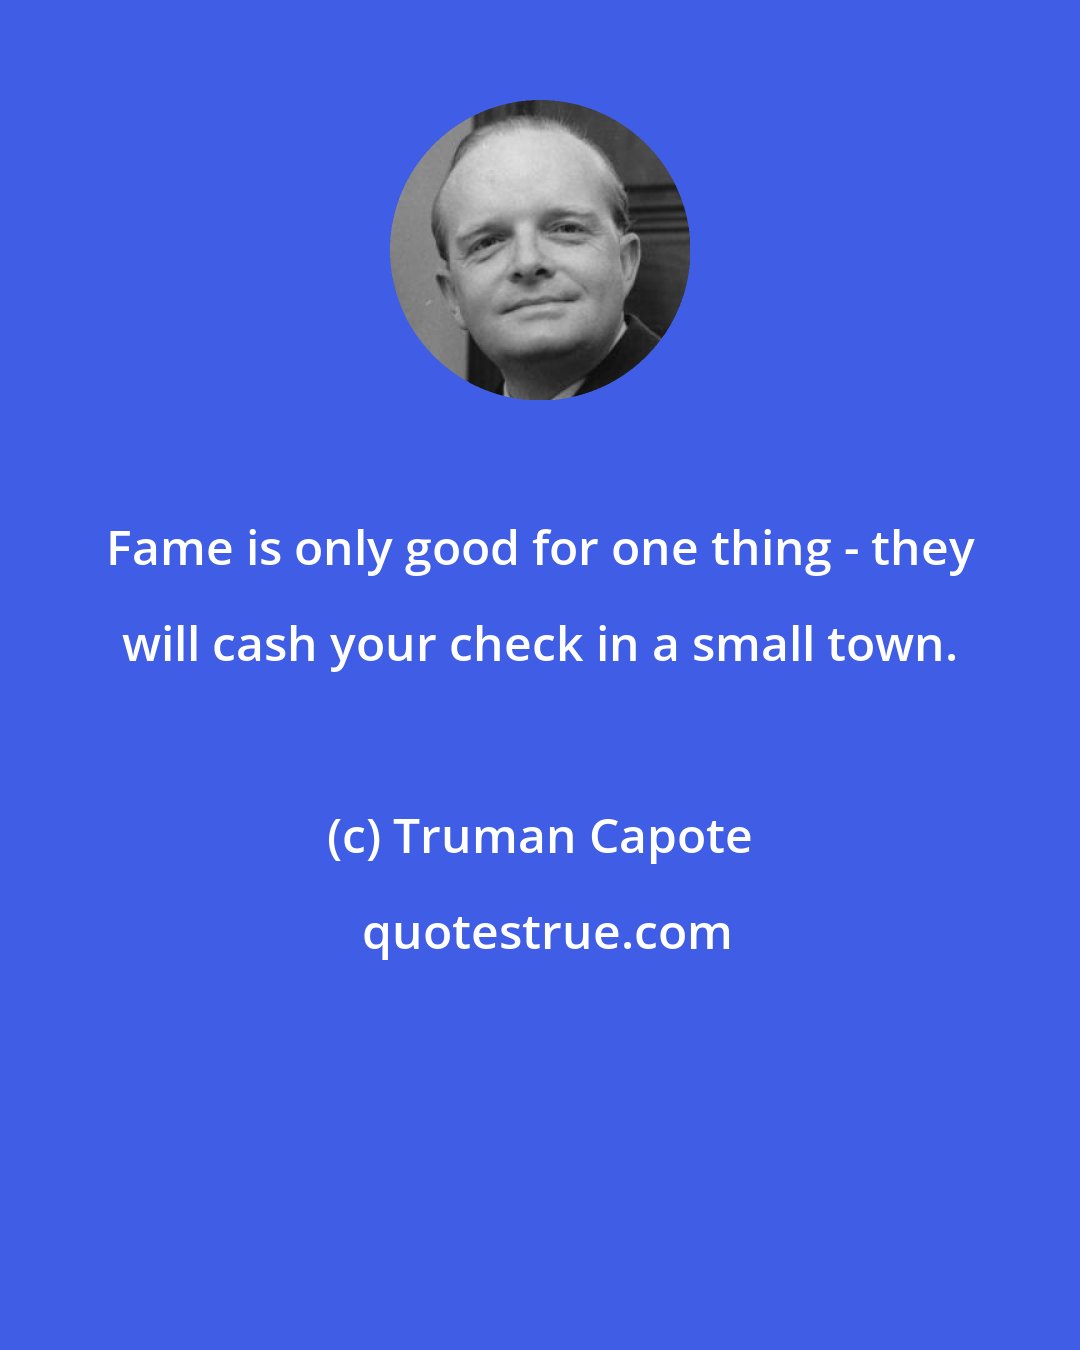 Truman Capote: Fame is only good for one thing - they will cash your check in a small town.